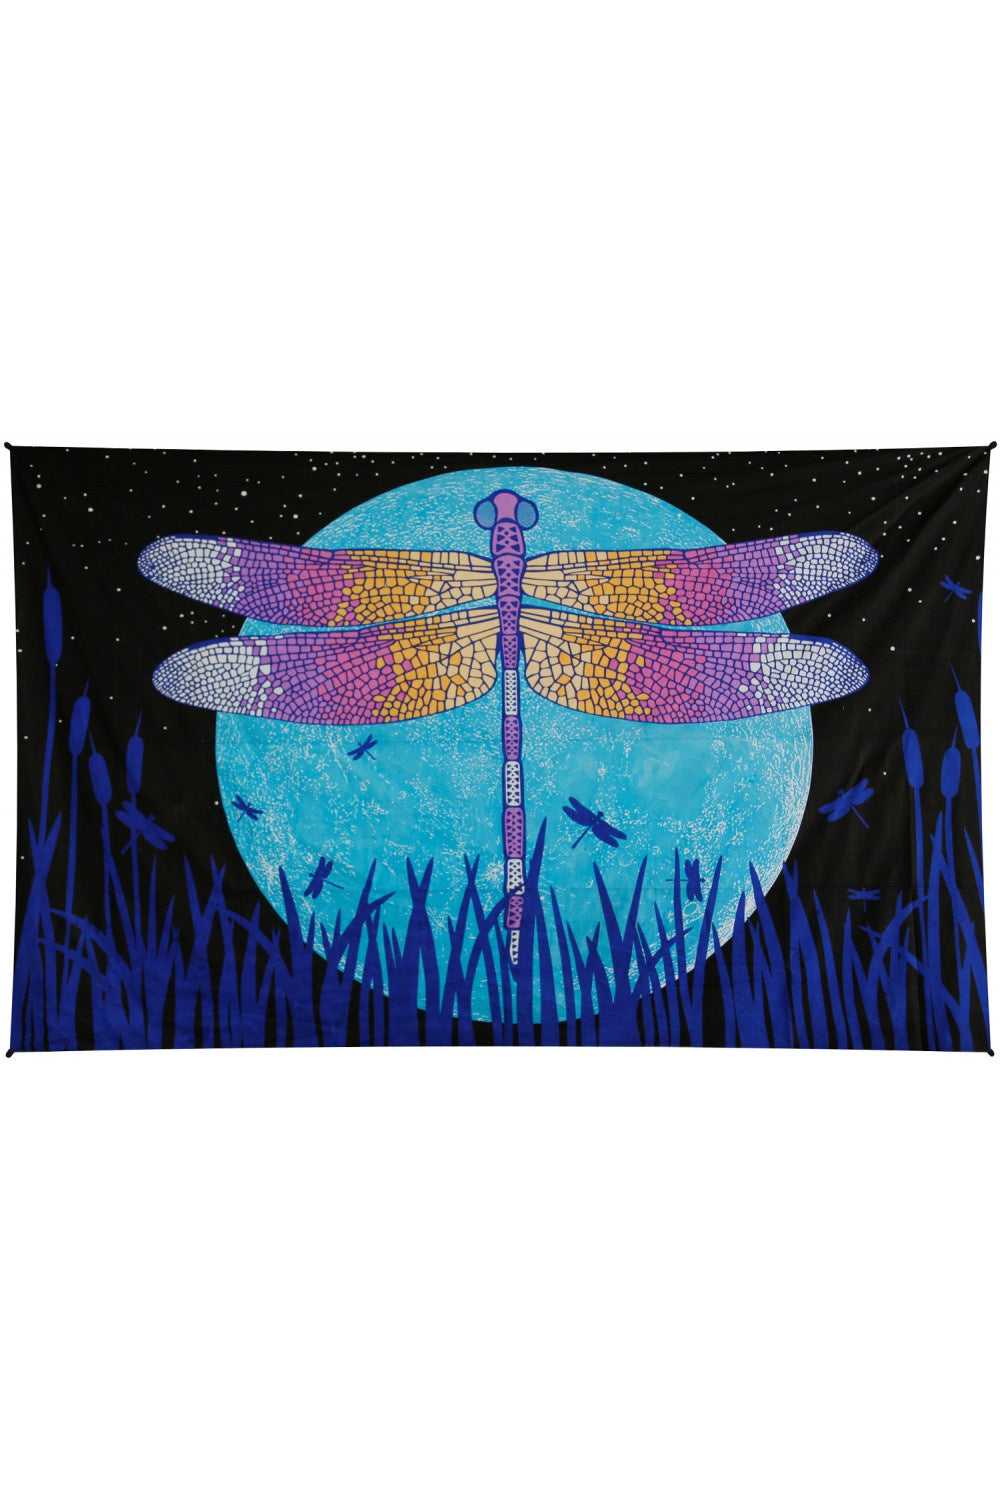 Dragonfly Moon Glow Tapestry 60x90